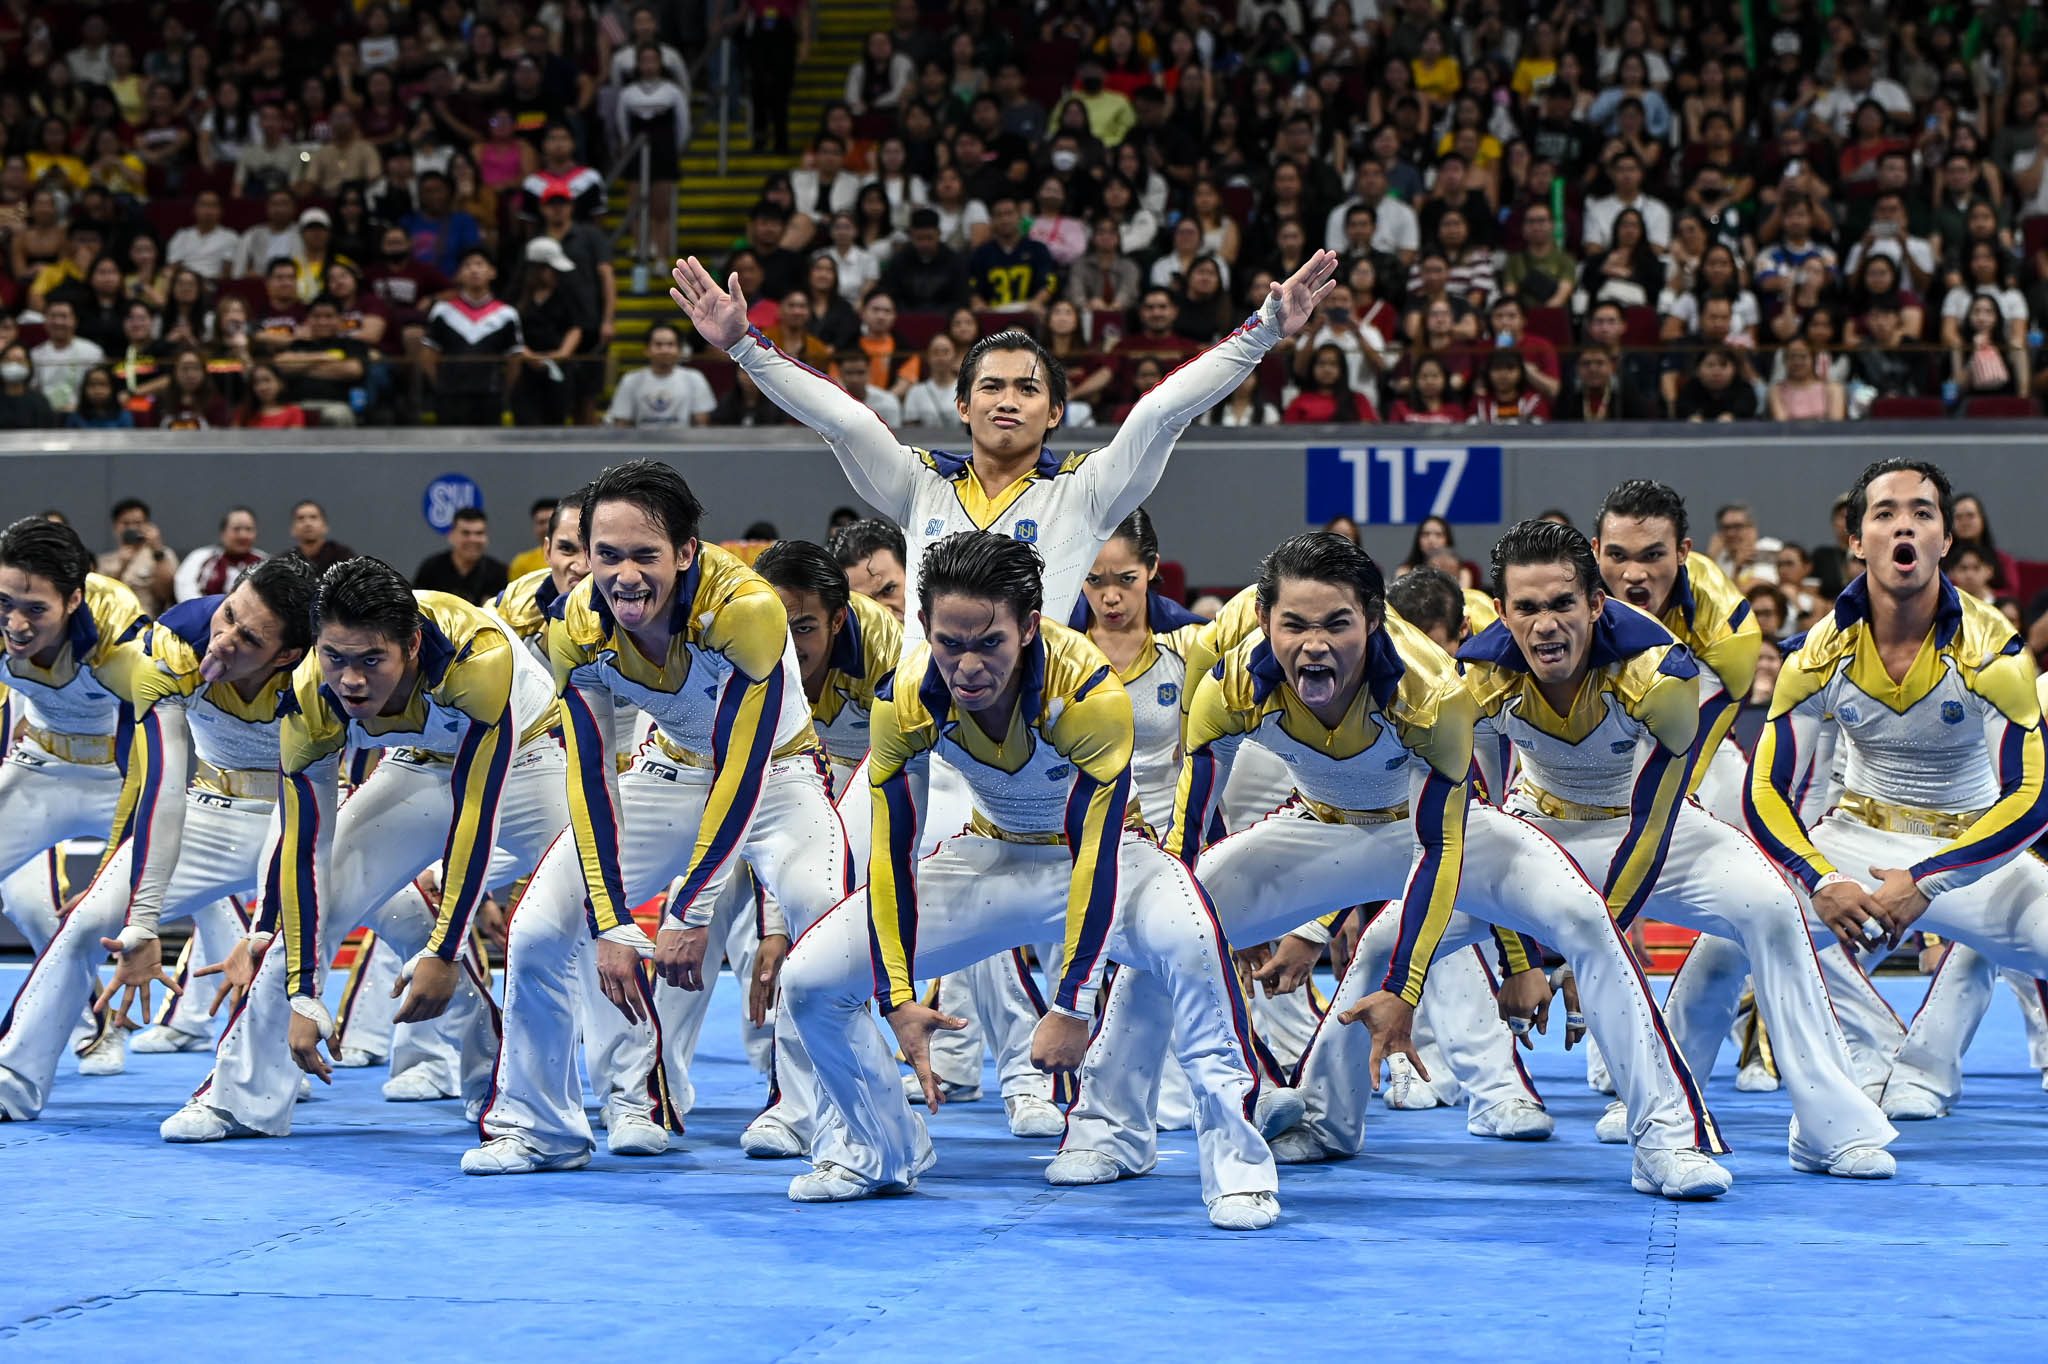 ‘Sad’ NU Pep Squad vows to rule UAAP cheerdance again